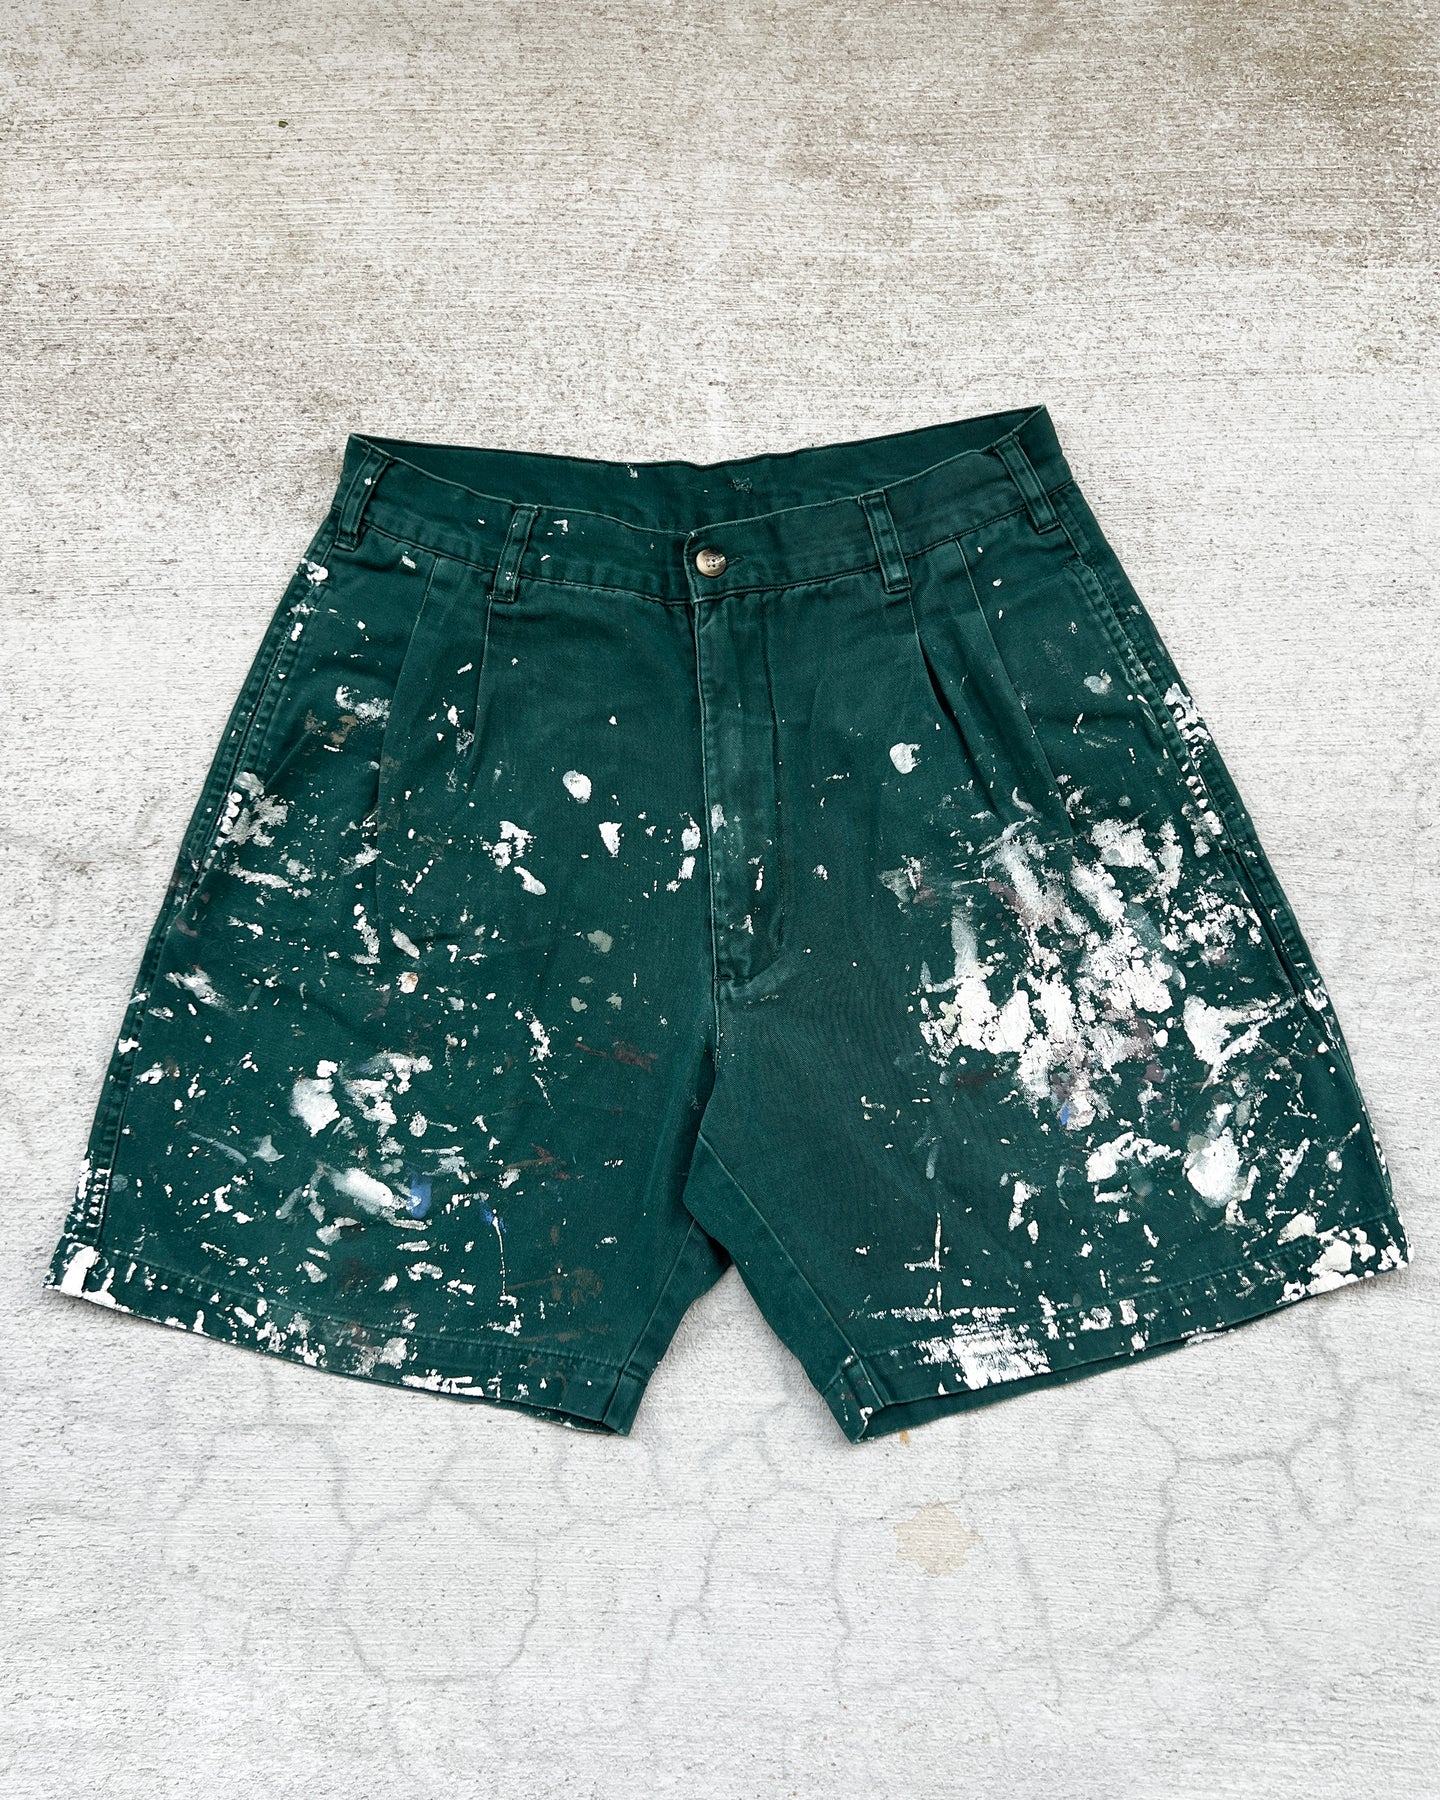 1990s Painter Pleated Sea Green Shorts - Size 29